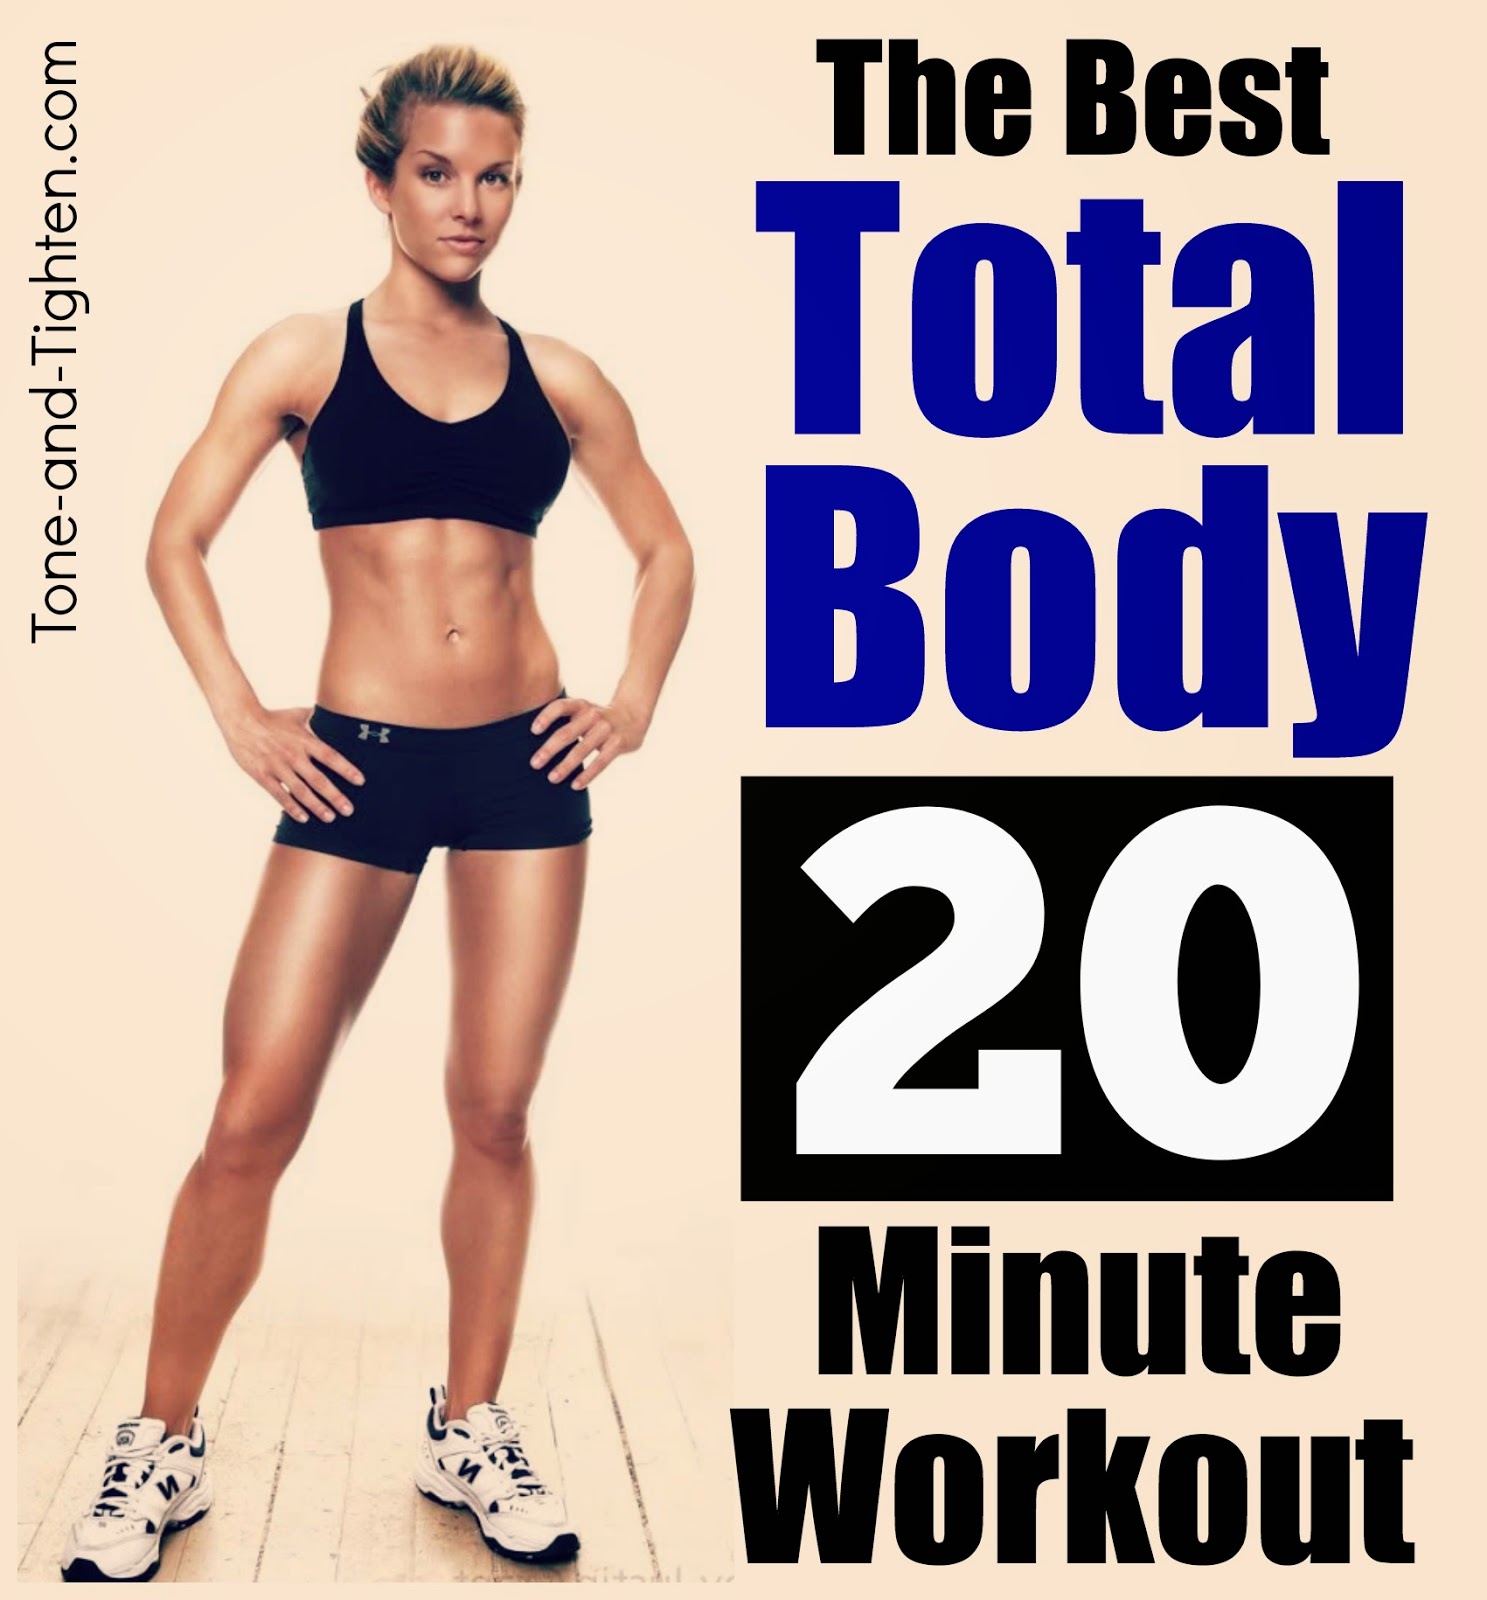 The Best 20 Minute Total-Body Workout – The perfect workout when you’re short on time!